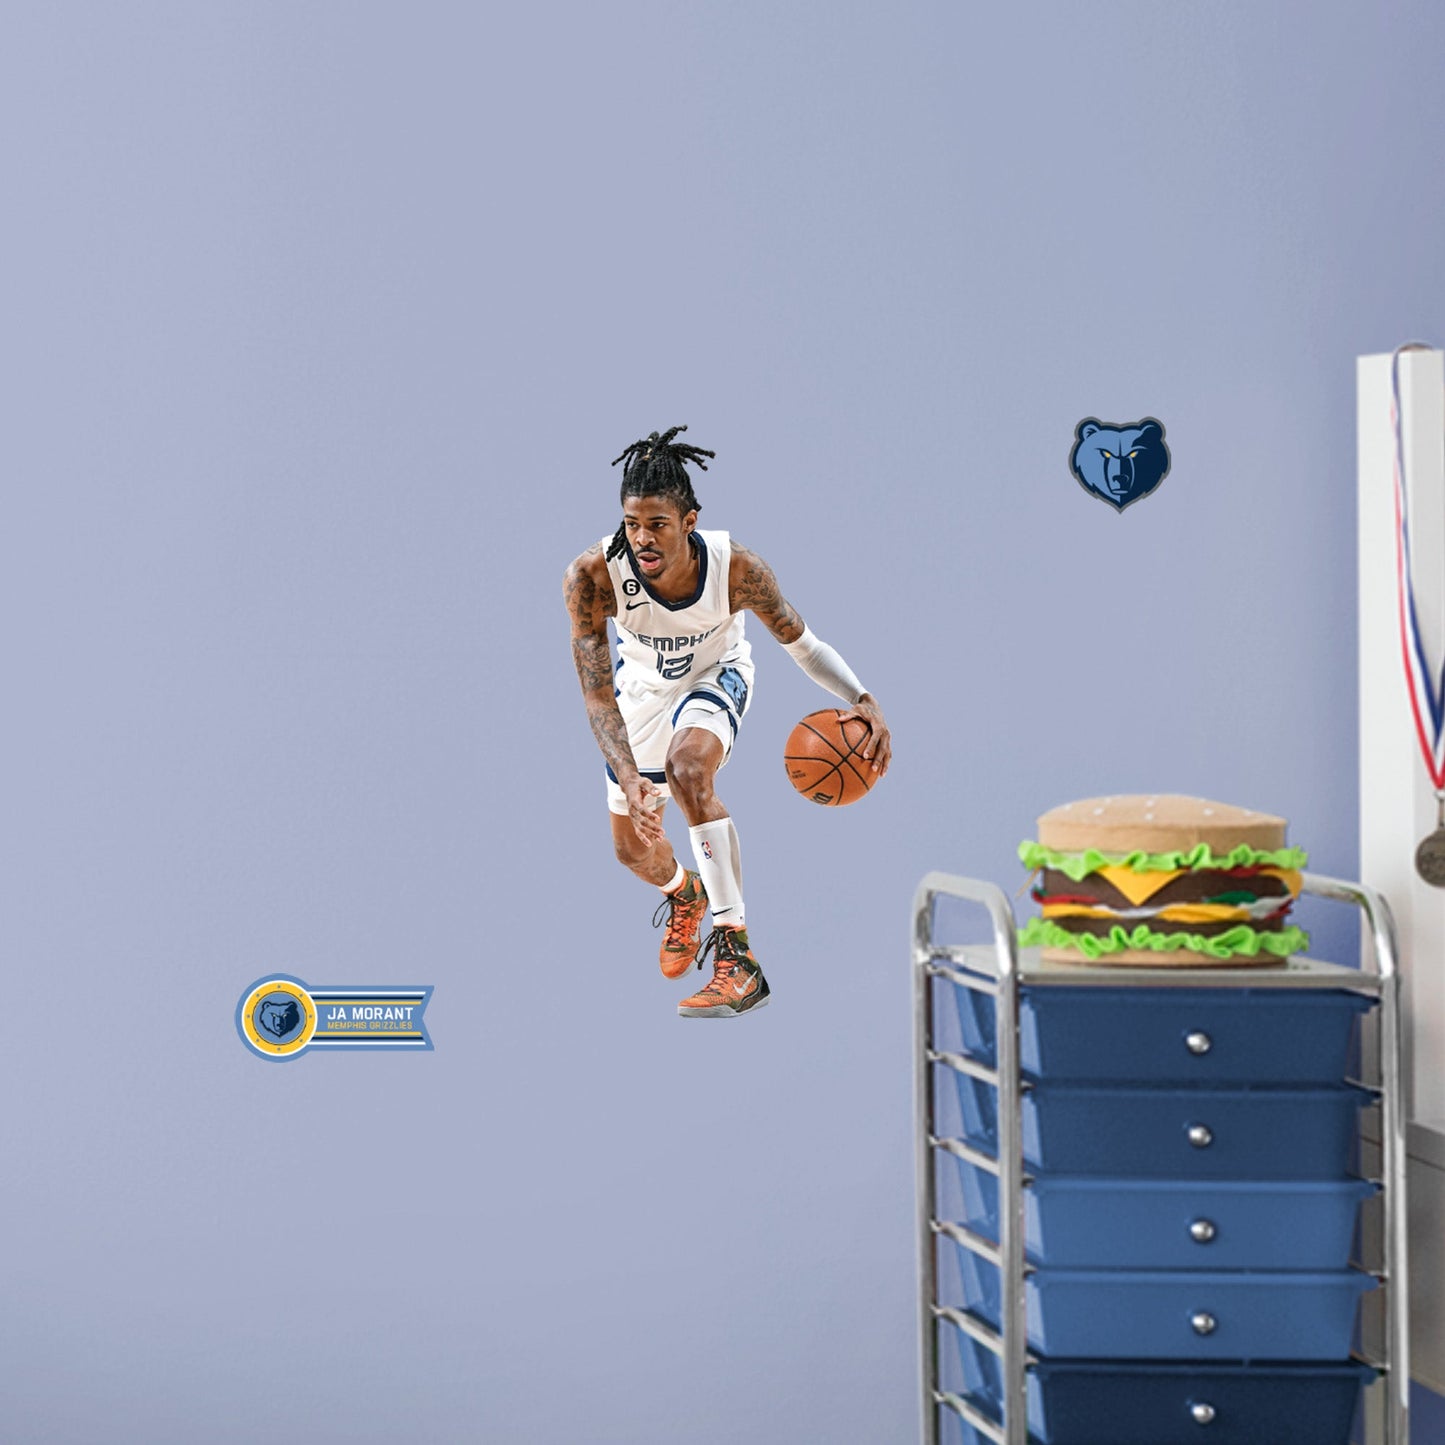 Memphis Grizzlies: Ja Morant - Officially Licensed NBA Removable Adhesive Decal